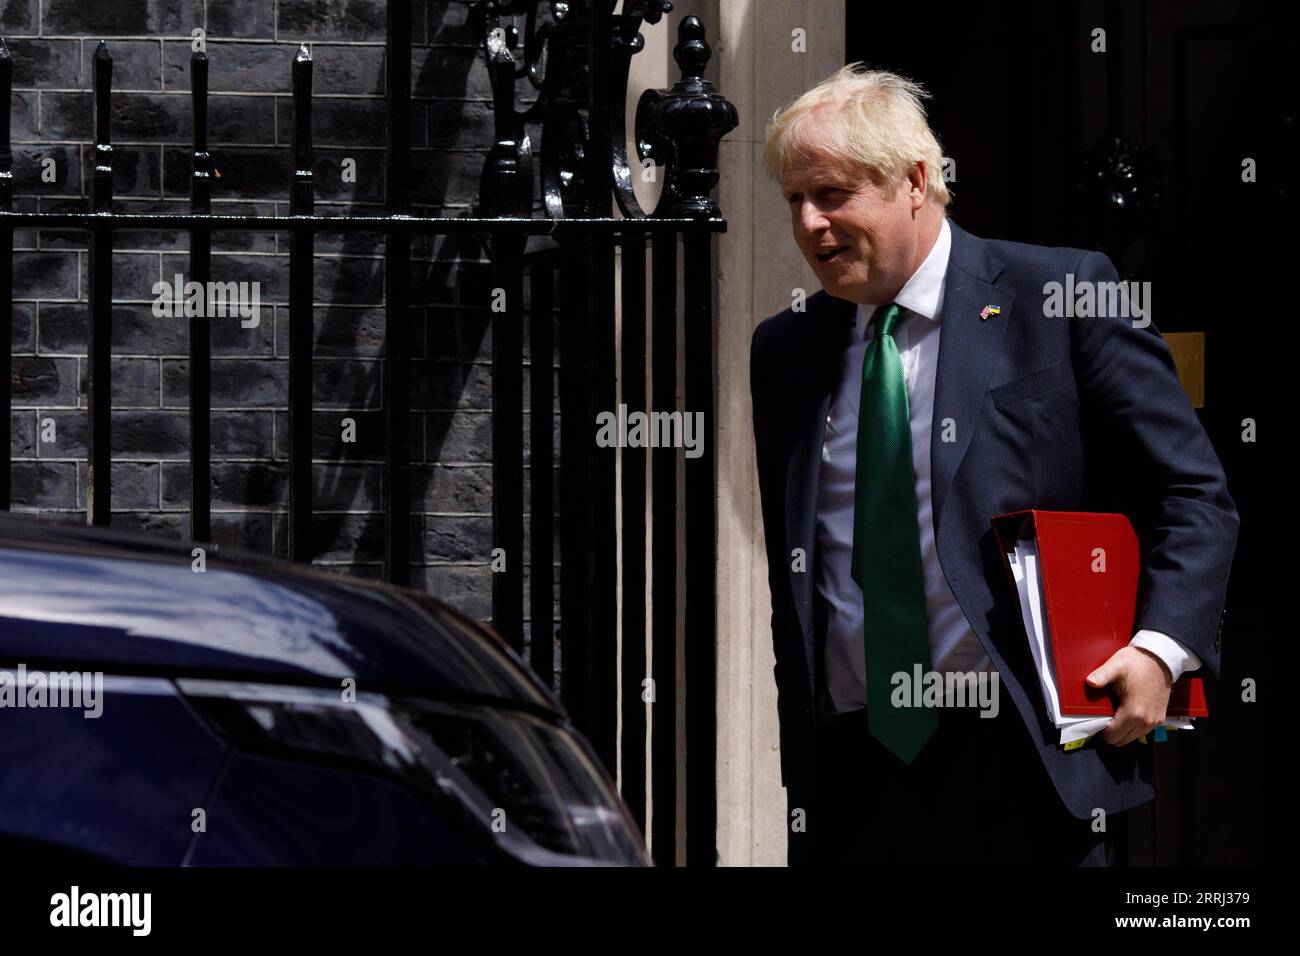 220713 -- LONDON, July 13, 2022 -- British Prime Minister Boris Johnson leaves 10 Downing Street for Prime Minister s Questions in London, Britain, July 13, 2022. Boris Johnson resigned as British prime minister and the leader of the Conservative Party in a statement to the country on July 7. The new prime minister of the United Kingdom UK replacing incumbent Boris Johnson will be announced on September 5, said Graham Brady, chairman of the Conservative Party s backbench 1922 Committee, on Monday. Photo by /Xinhua BRITAIN-LONDON-BORIS JOHNSON-PMQ TimxIreland PUBLICATIONxNOTxINxCHN Stock Photo